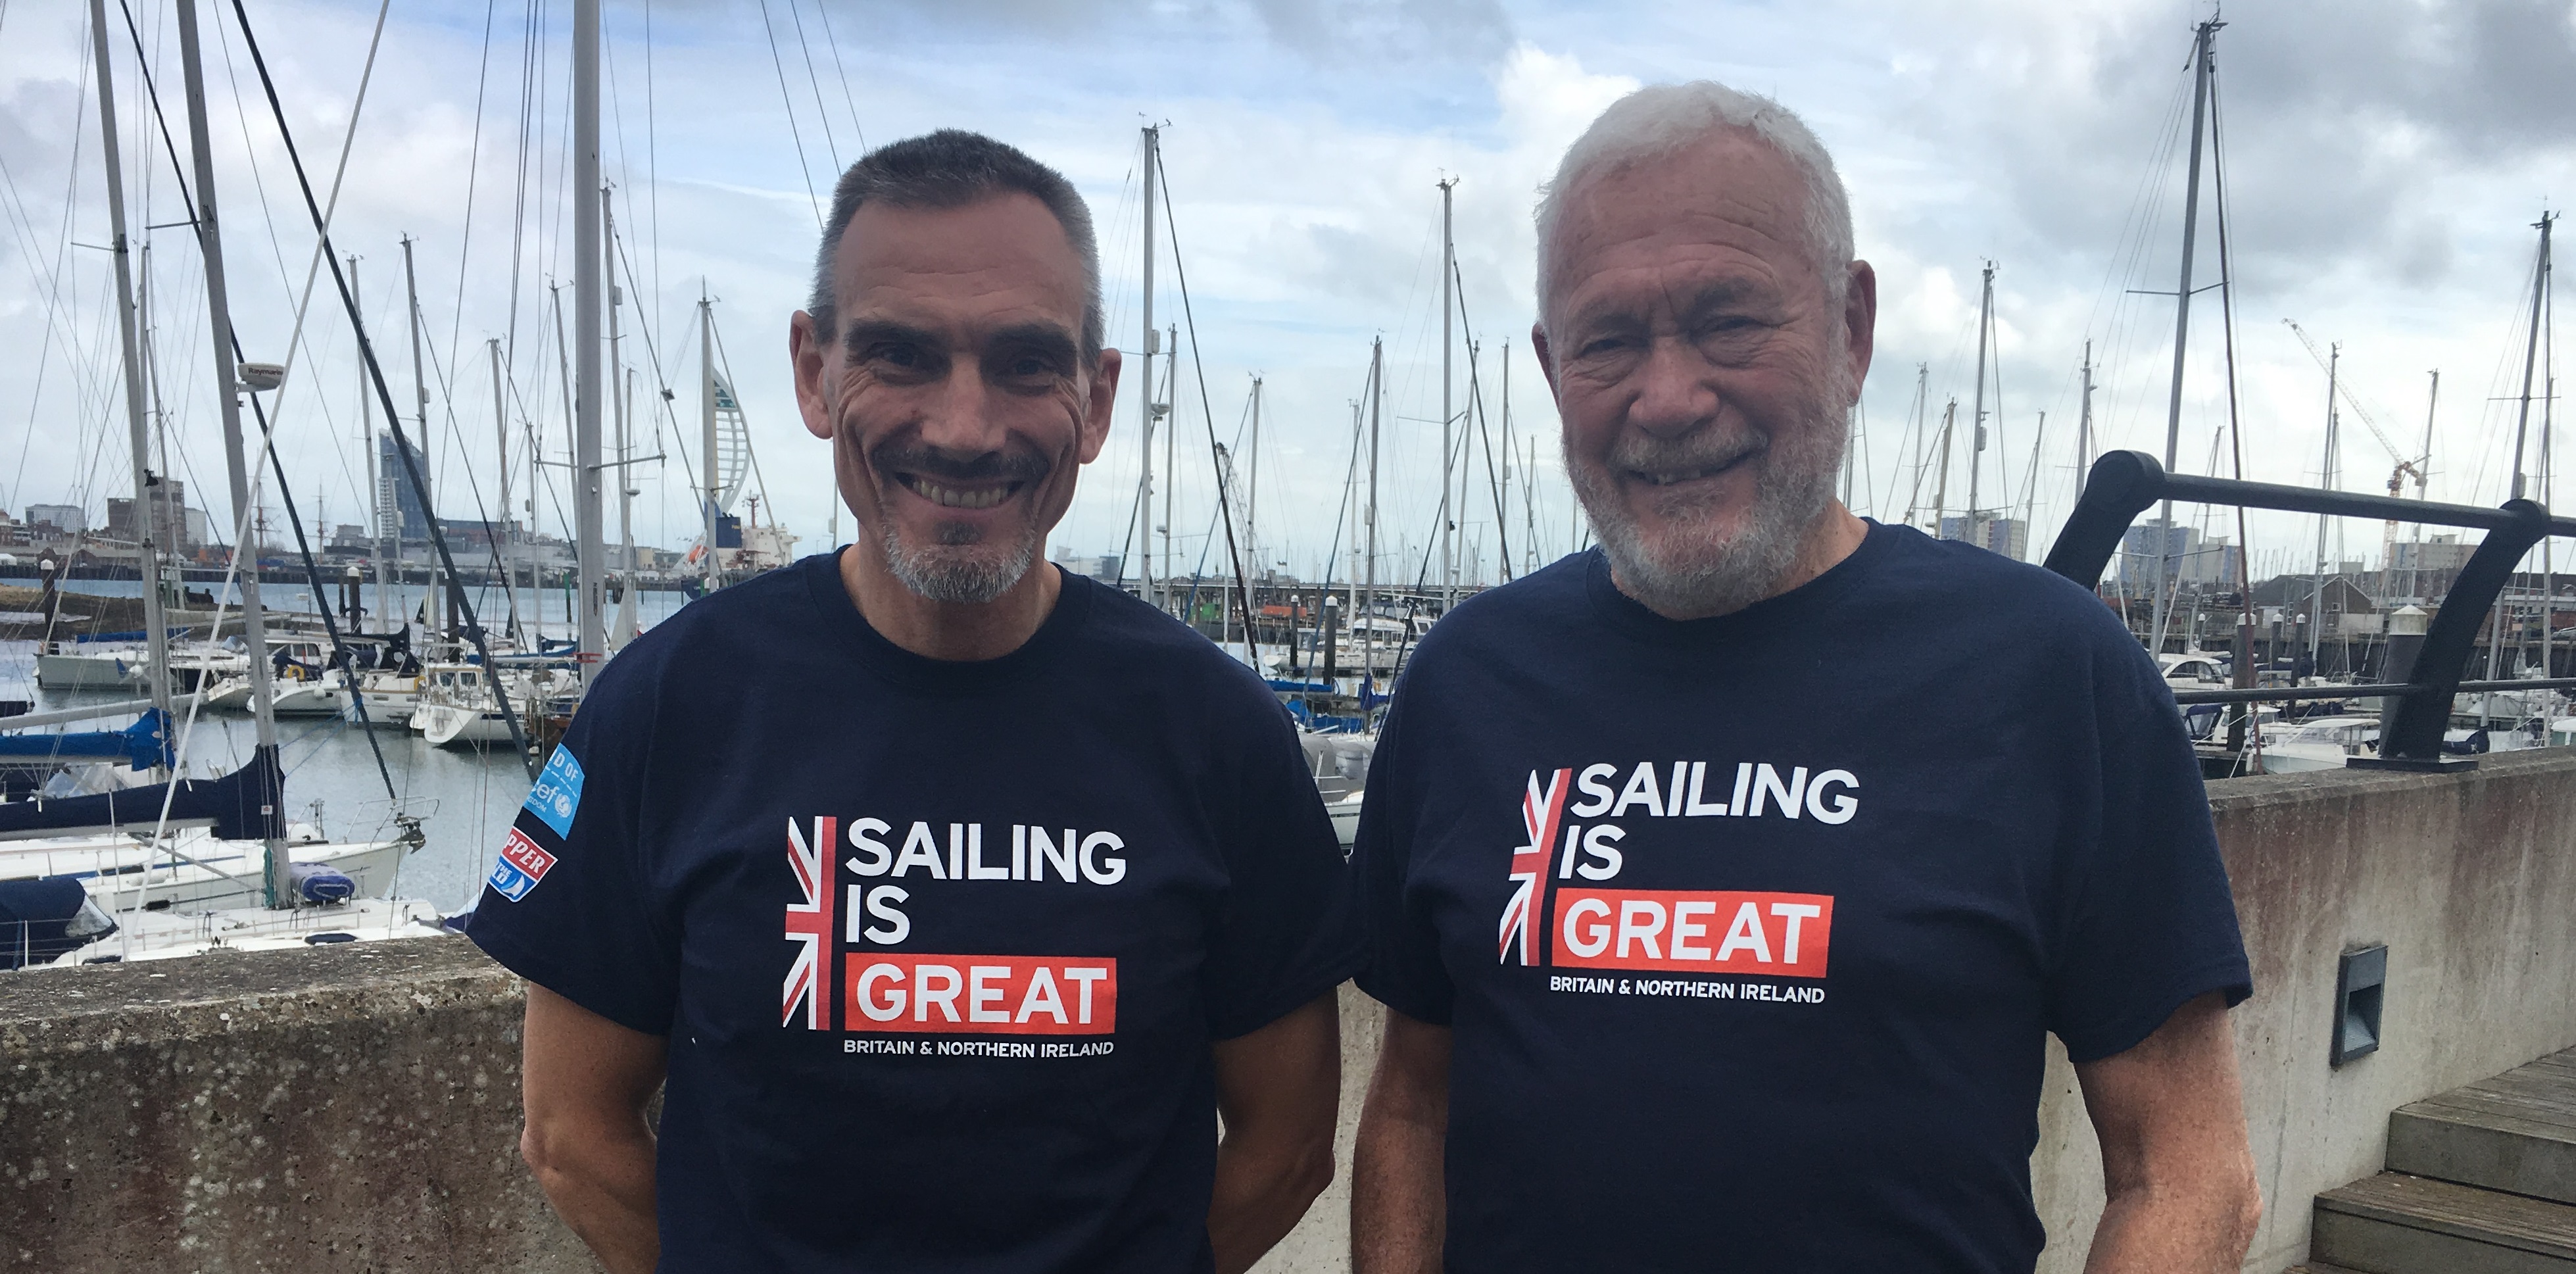 Clipper Race founders William Ward and Sir Robin Knox-Johnston pictured wearing the Sailing is GREAT Tshirt